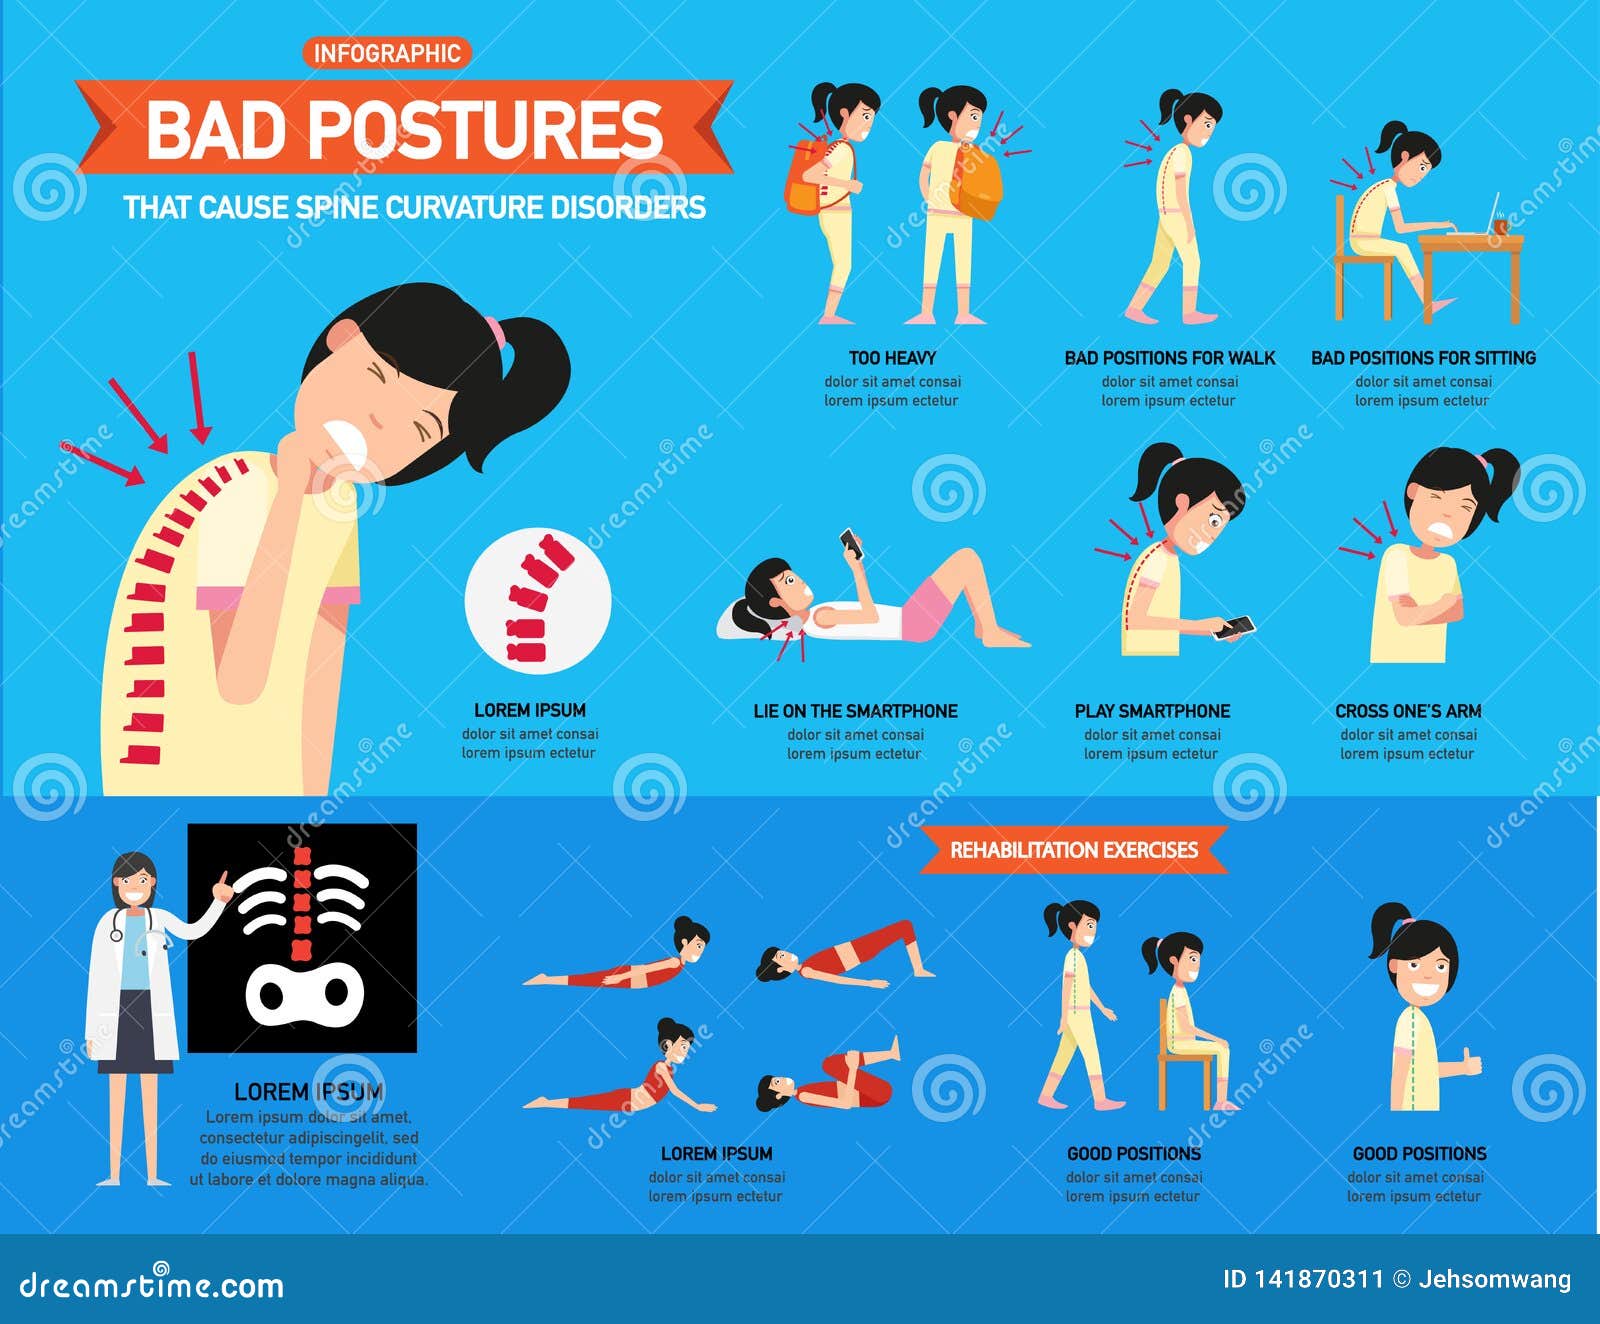 bad postures that cause spine curvature disorders infographic